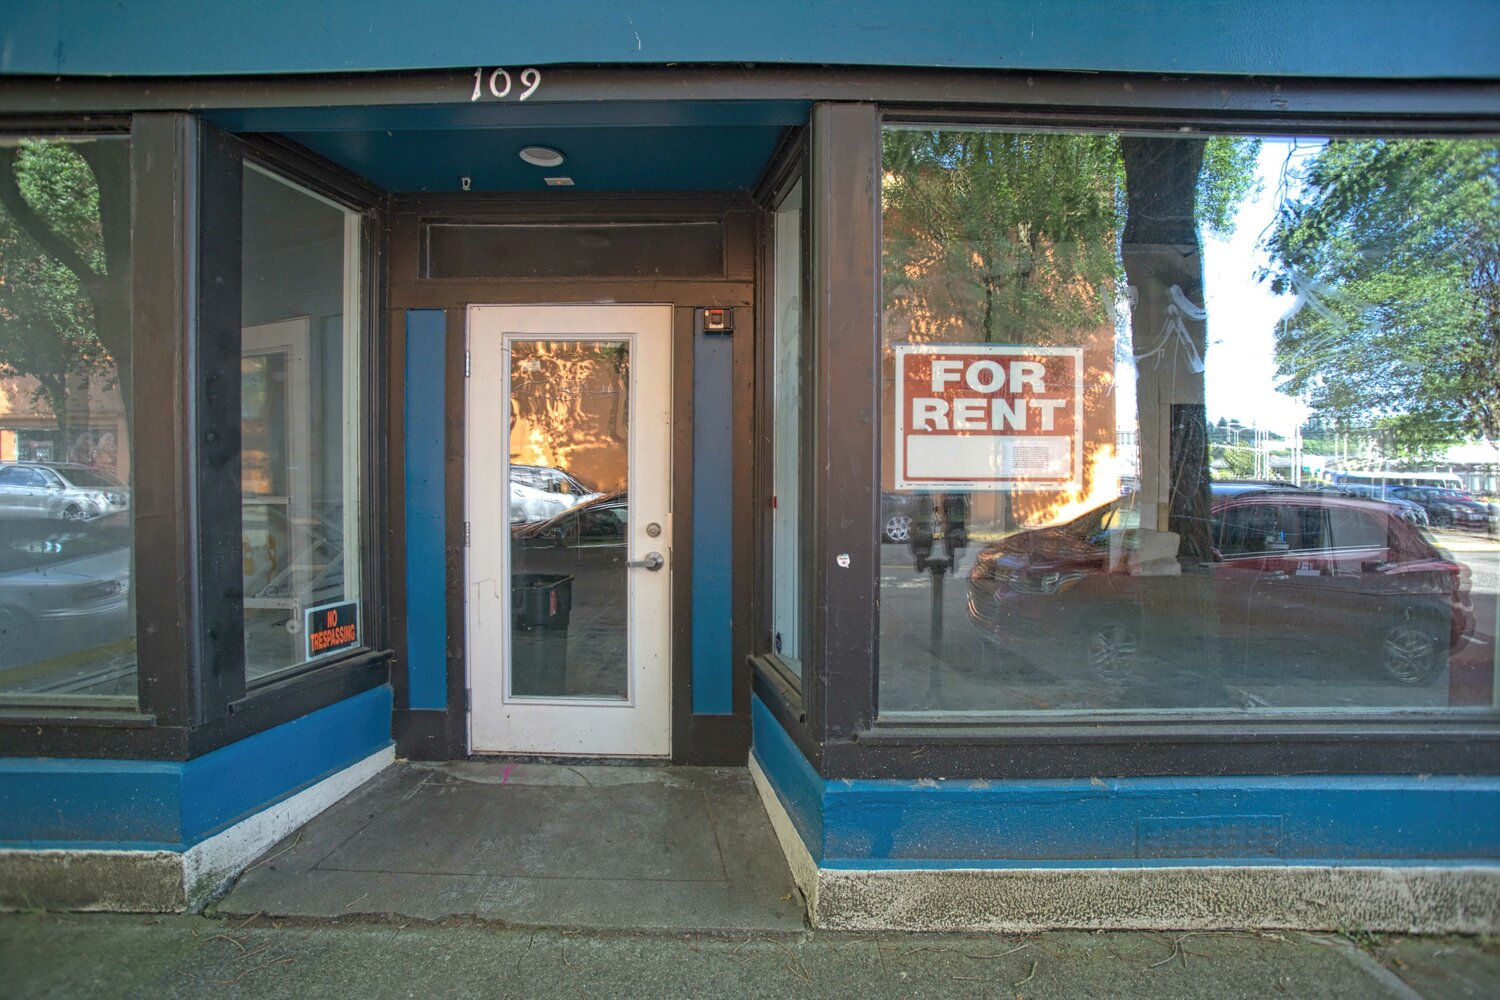 Much of the downtown area of Olympia is comprised of cracked and broken sidewalks, trespassers on private property, garbage in alleys and outside of businesses, dirty streets, and empty storefronts. Shown is a building for rent.